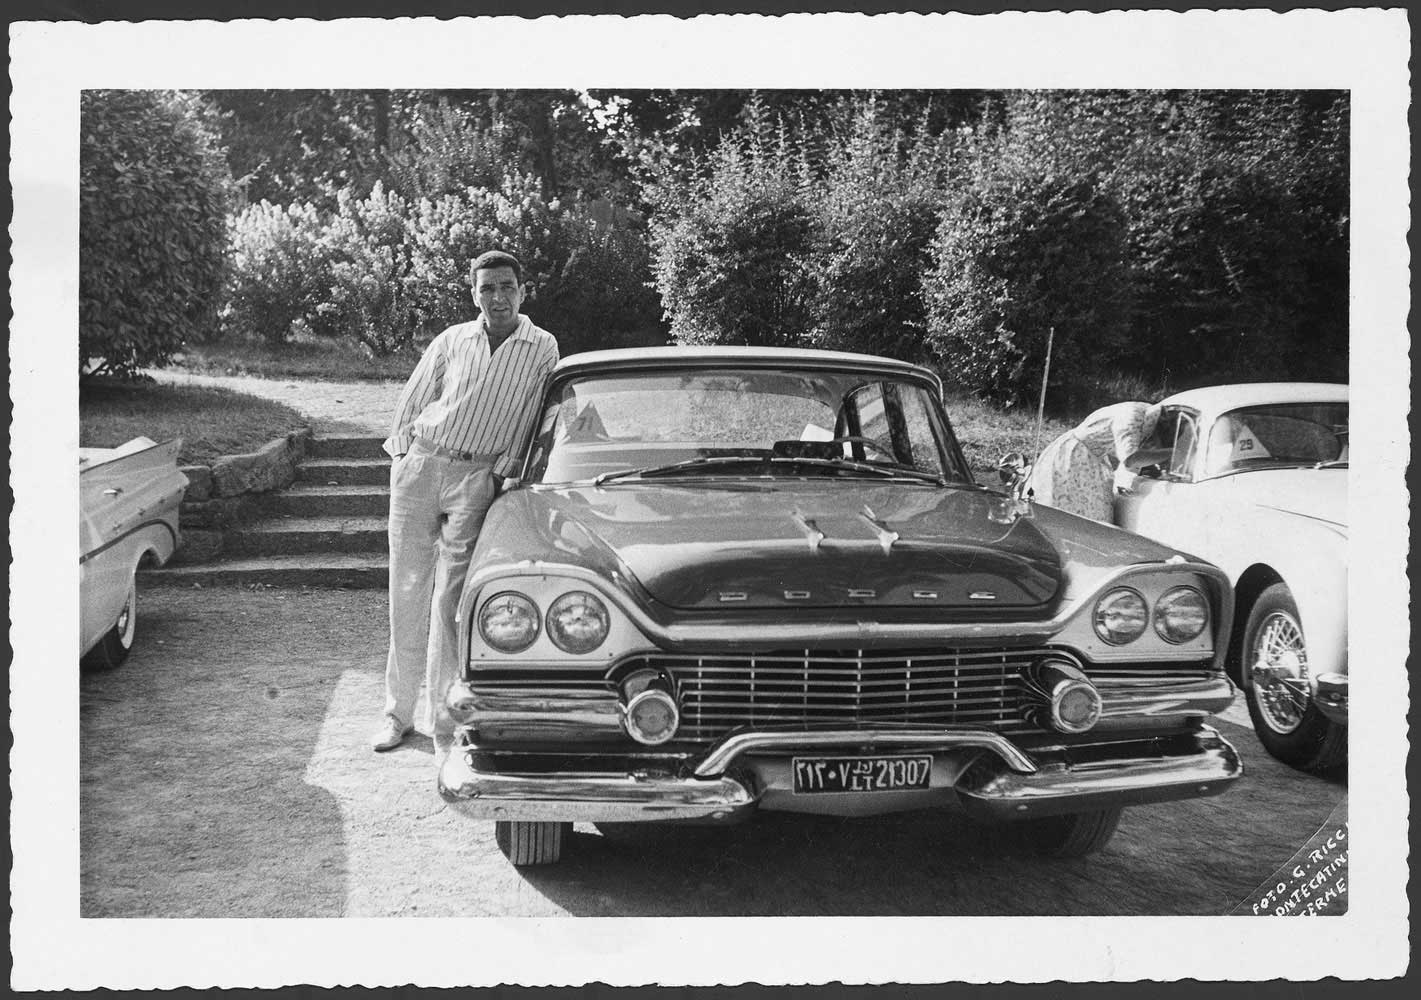 Mohamed Nga with his car Ñ purchased on a U.S. military base in Tripoli Ñ which he later entered in car shows